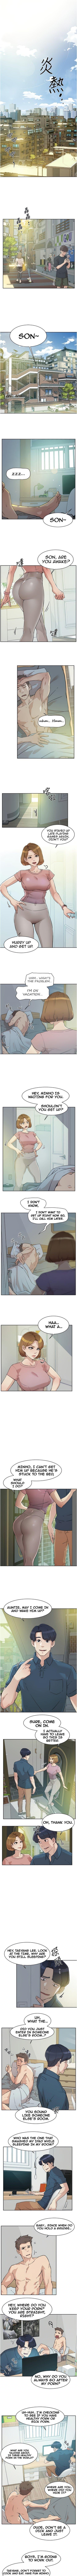 Tanga Everything about Best Friend Manhwa 01-13 Rough Fuck - Page 2